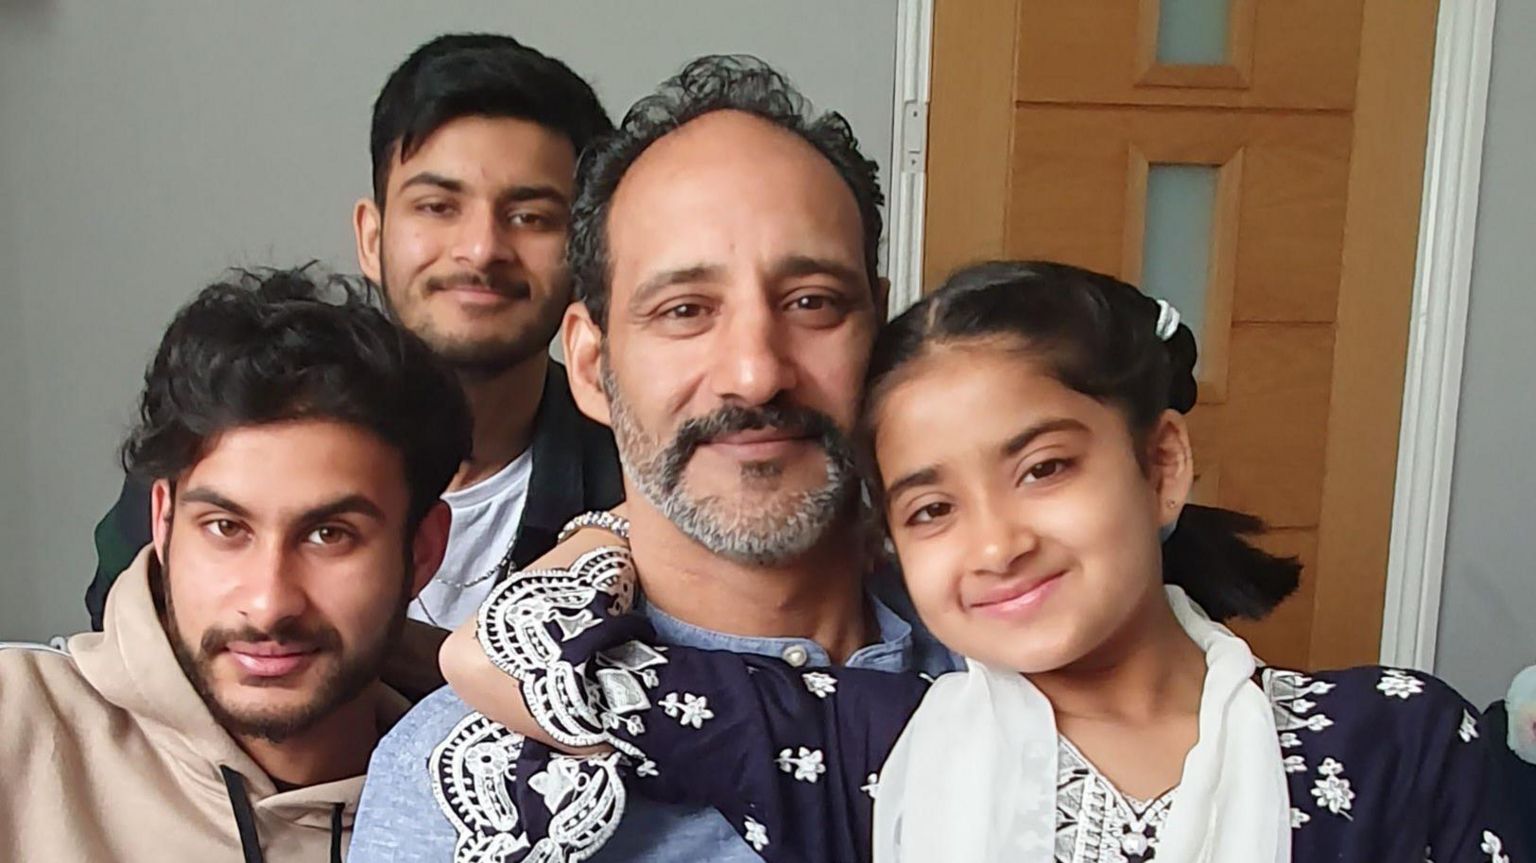 Sfiyah with her father, Gulafhfaq and her brothers Kaden and Haider. 